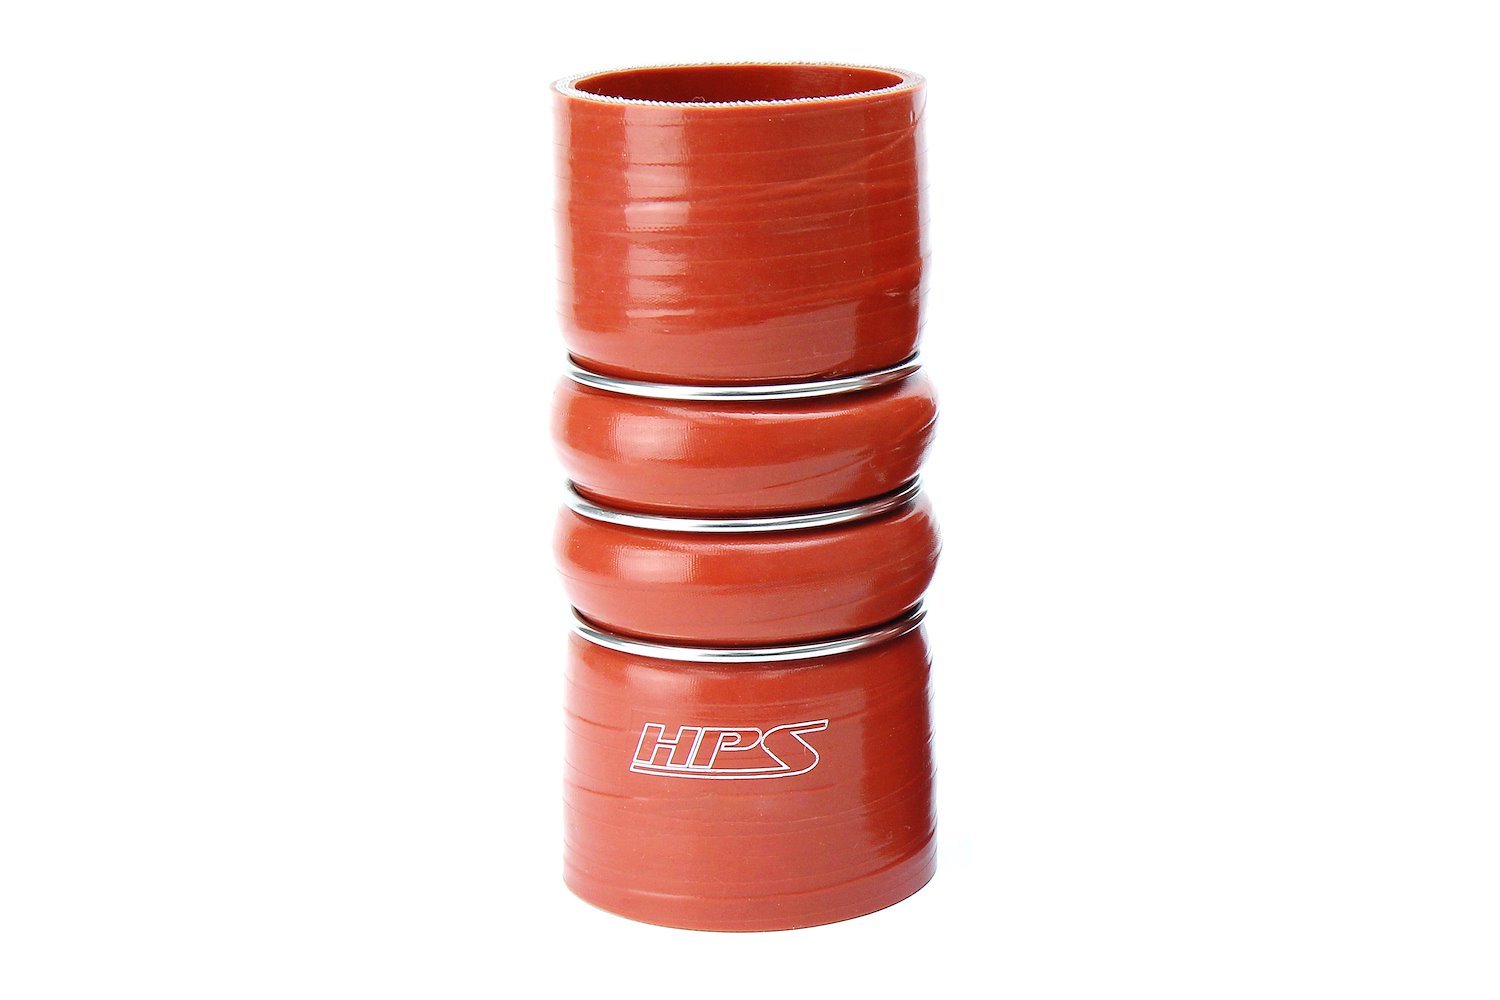 CAC-800-HOT Silicone CAC Hose, Silicone CAC Hump Hose Hot, High-Temp 4-Ply Aramid Reinforced, 8 in. ID, 6 in. Long